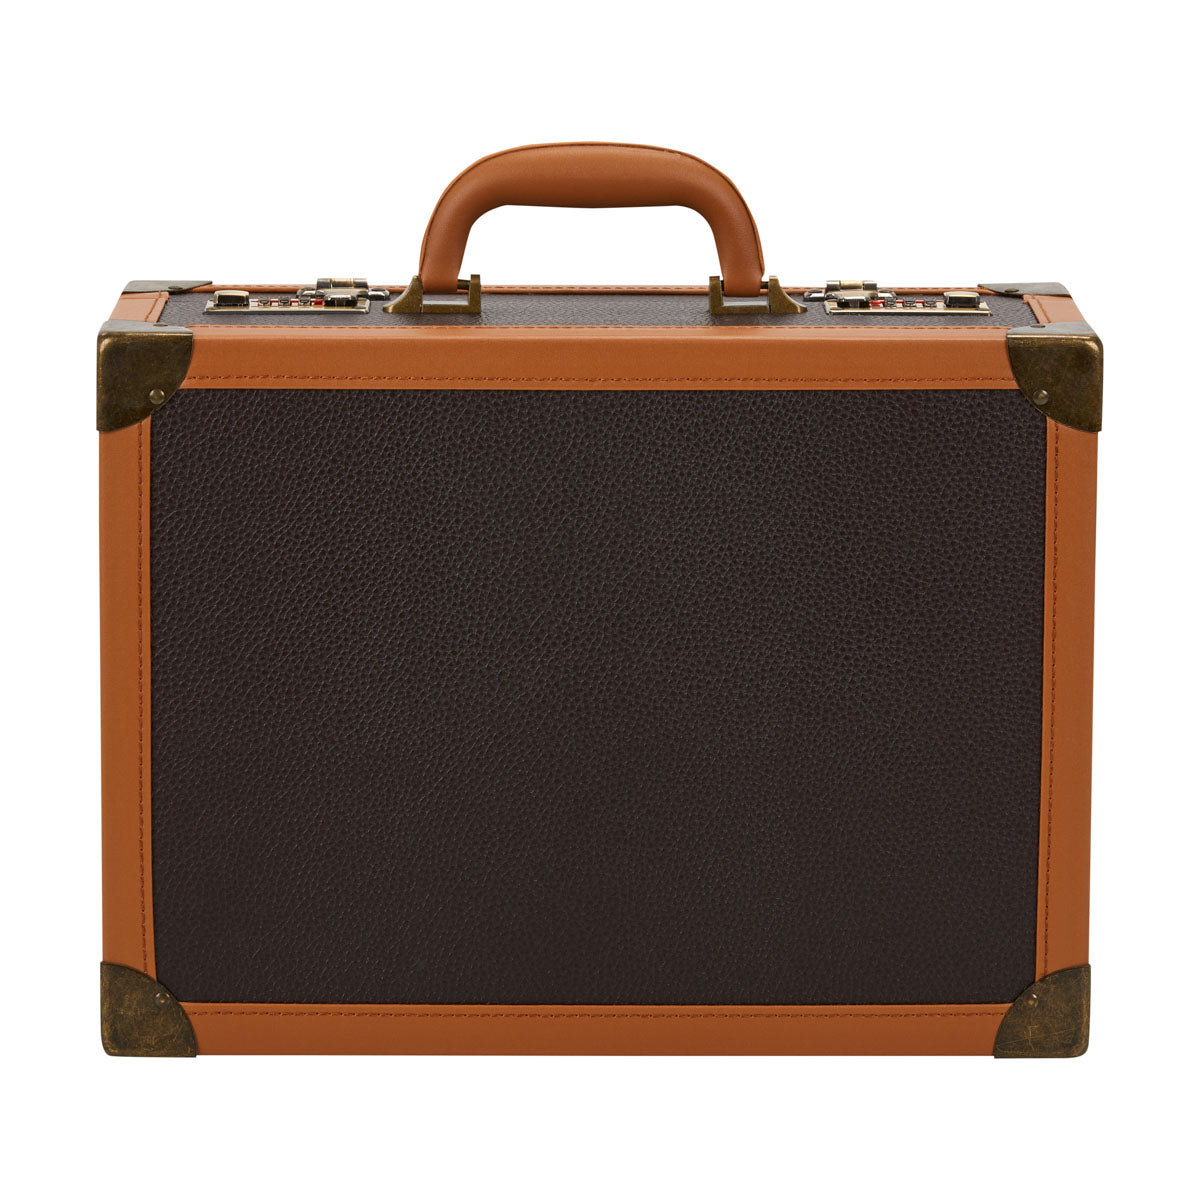 BARBER BROWN HAIRDRESSING SUITCASE